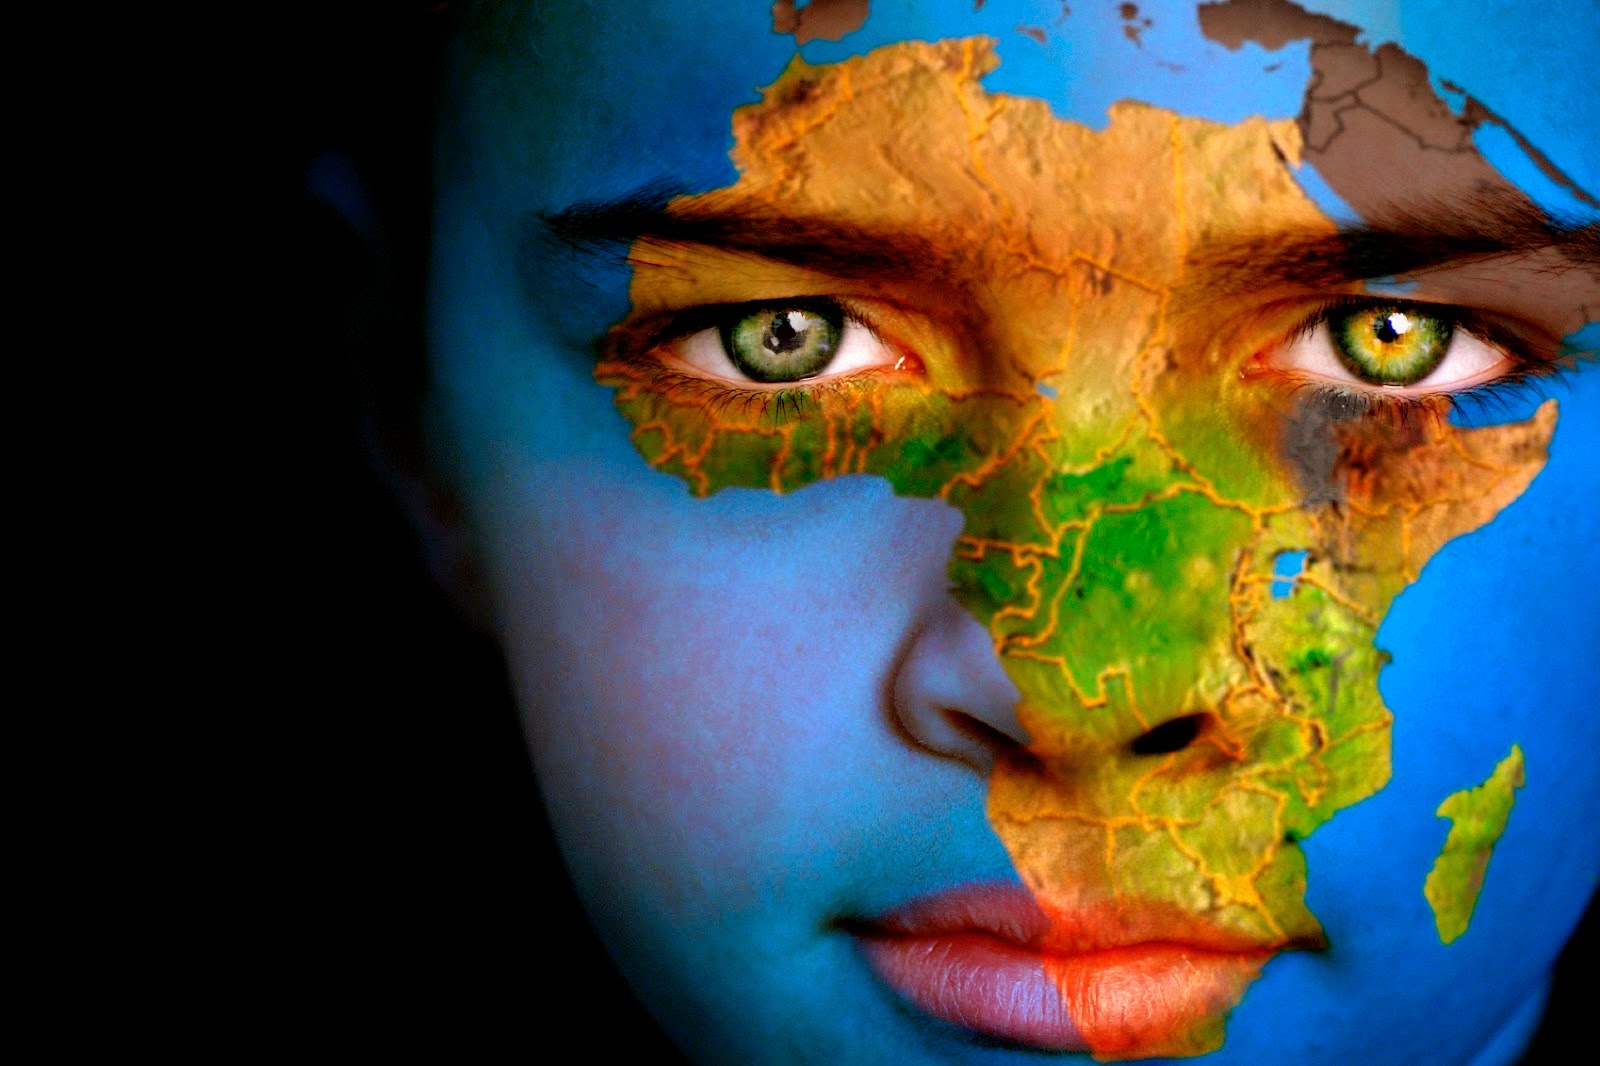 Face of Africa